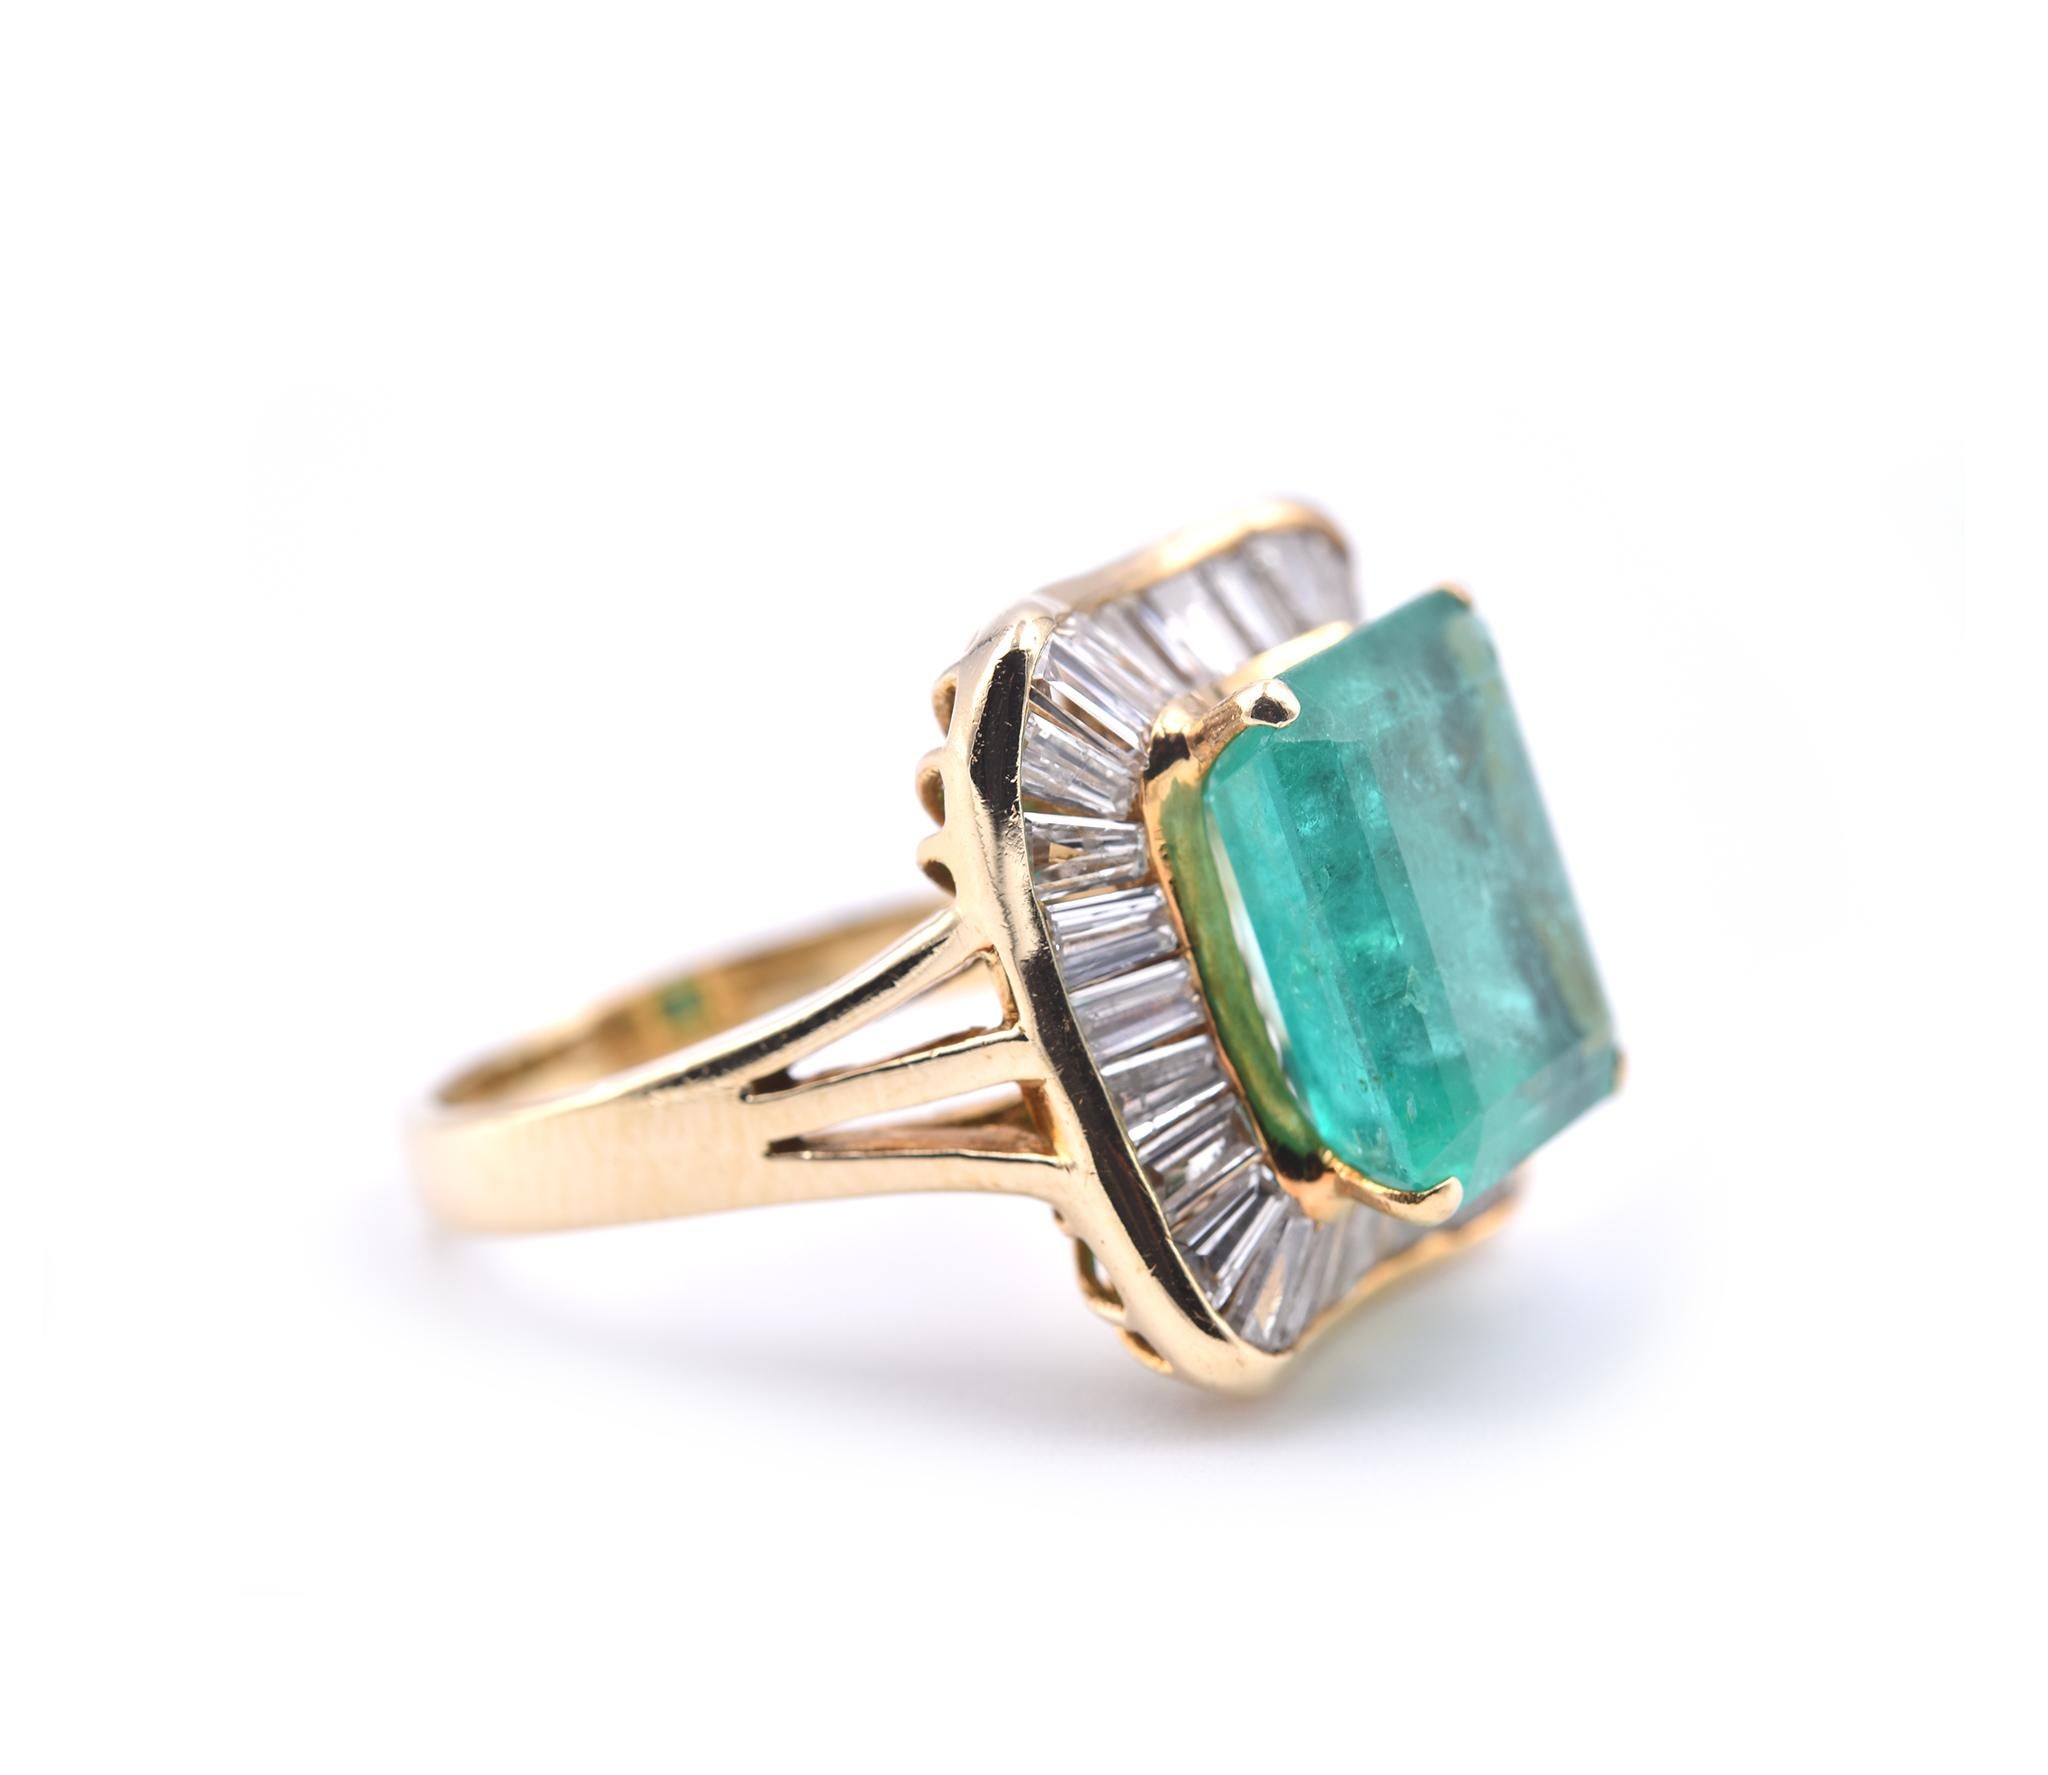 Designer: custom design
Material: 18k yellow gold 
Emerald: 4.41ct emerald Cut
Diamonds: 29 baguette cut = .87cttw 
Color: G
Clarity: VS
Ring Size: 6 (please allow two additional shipping days for sizing requests)
Dimensions: ring top measures 17.12